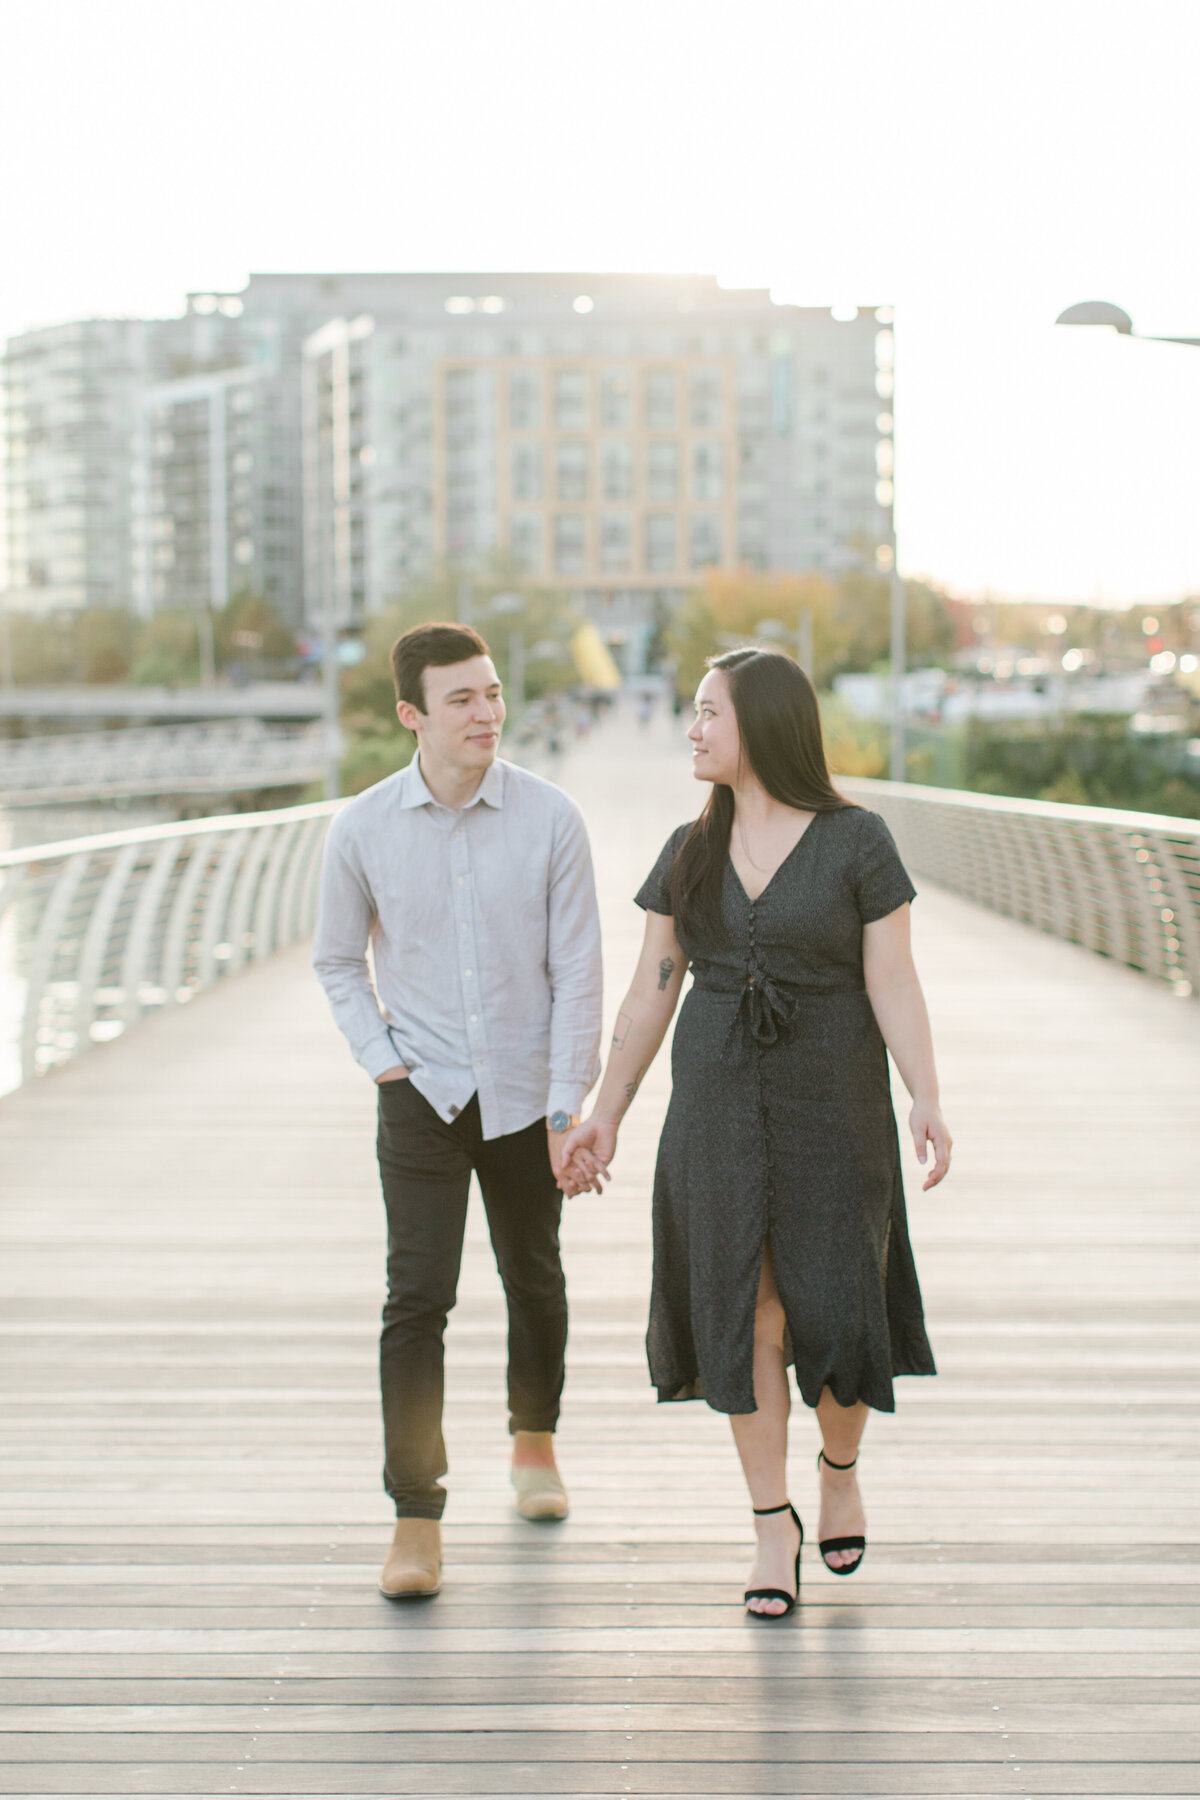 Becky_Collin_Navy_Yards_Park_The_Wharf_Washington_DC_Fall_Engagement_Session_AngelikaJohnsPhotography-7778